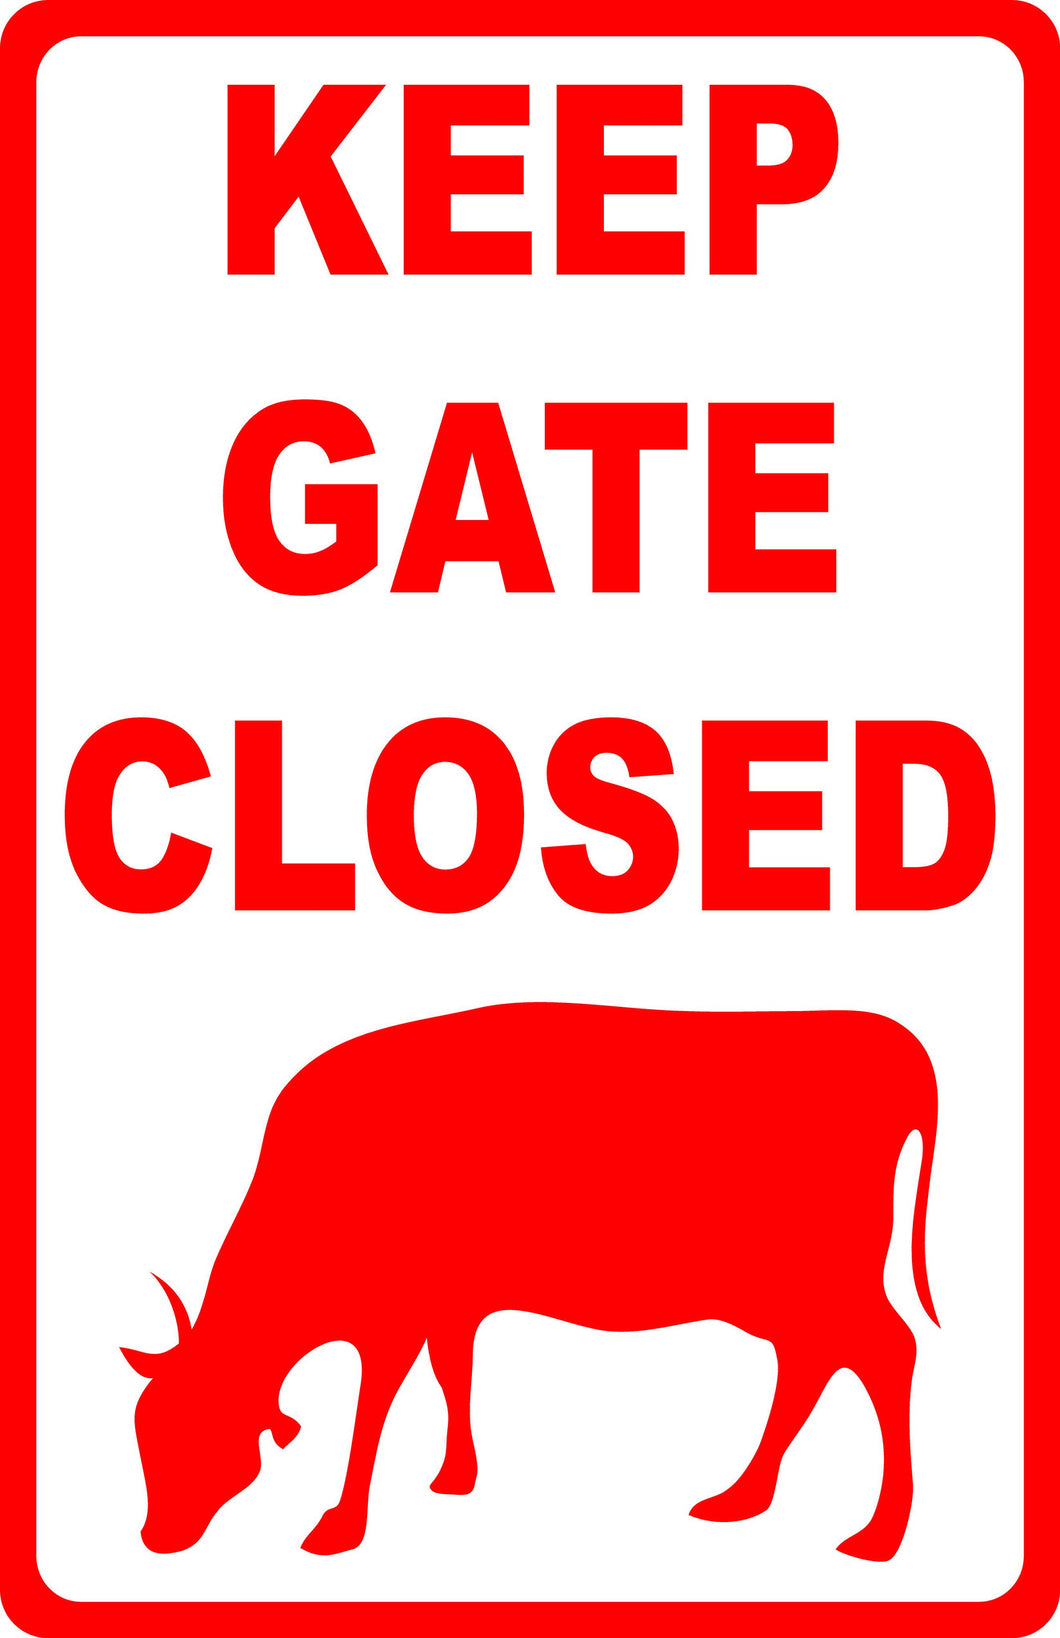 Keep Gate Closed with Cow Image - Signs & Decals by SalaGraphics